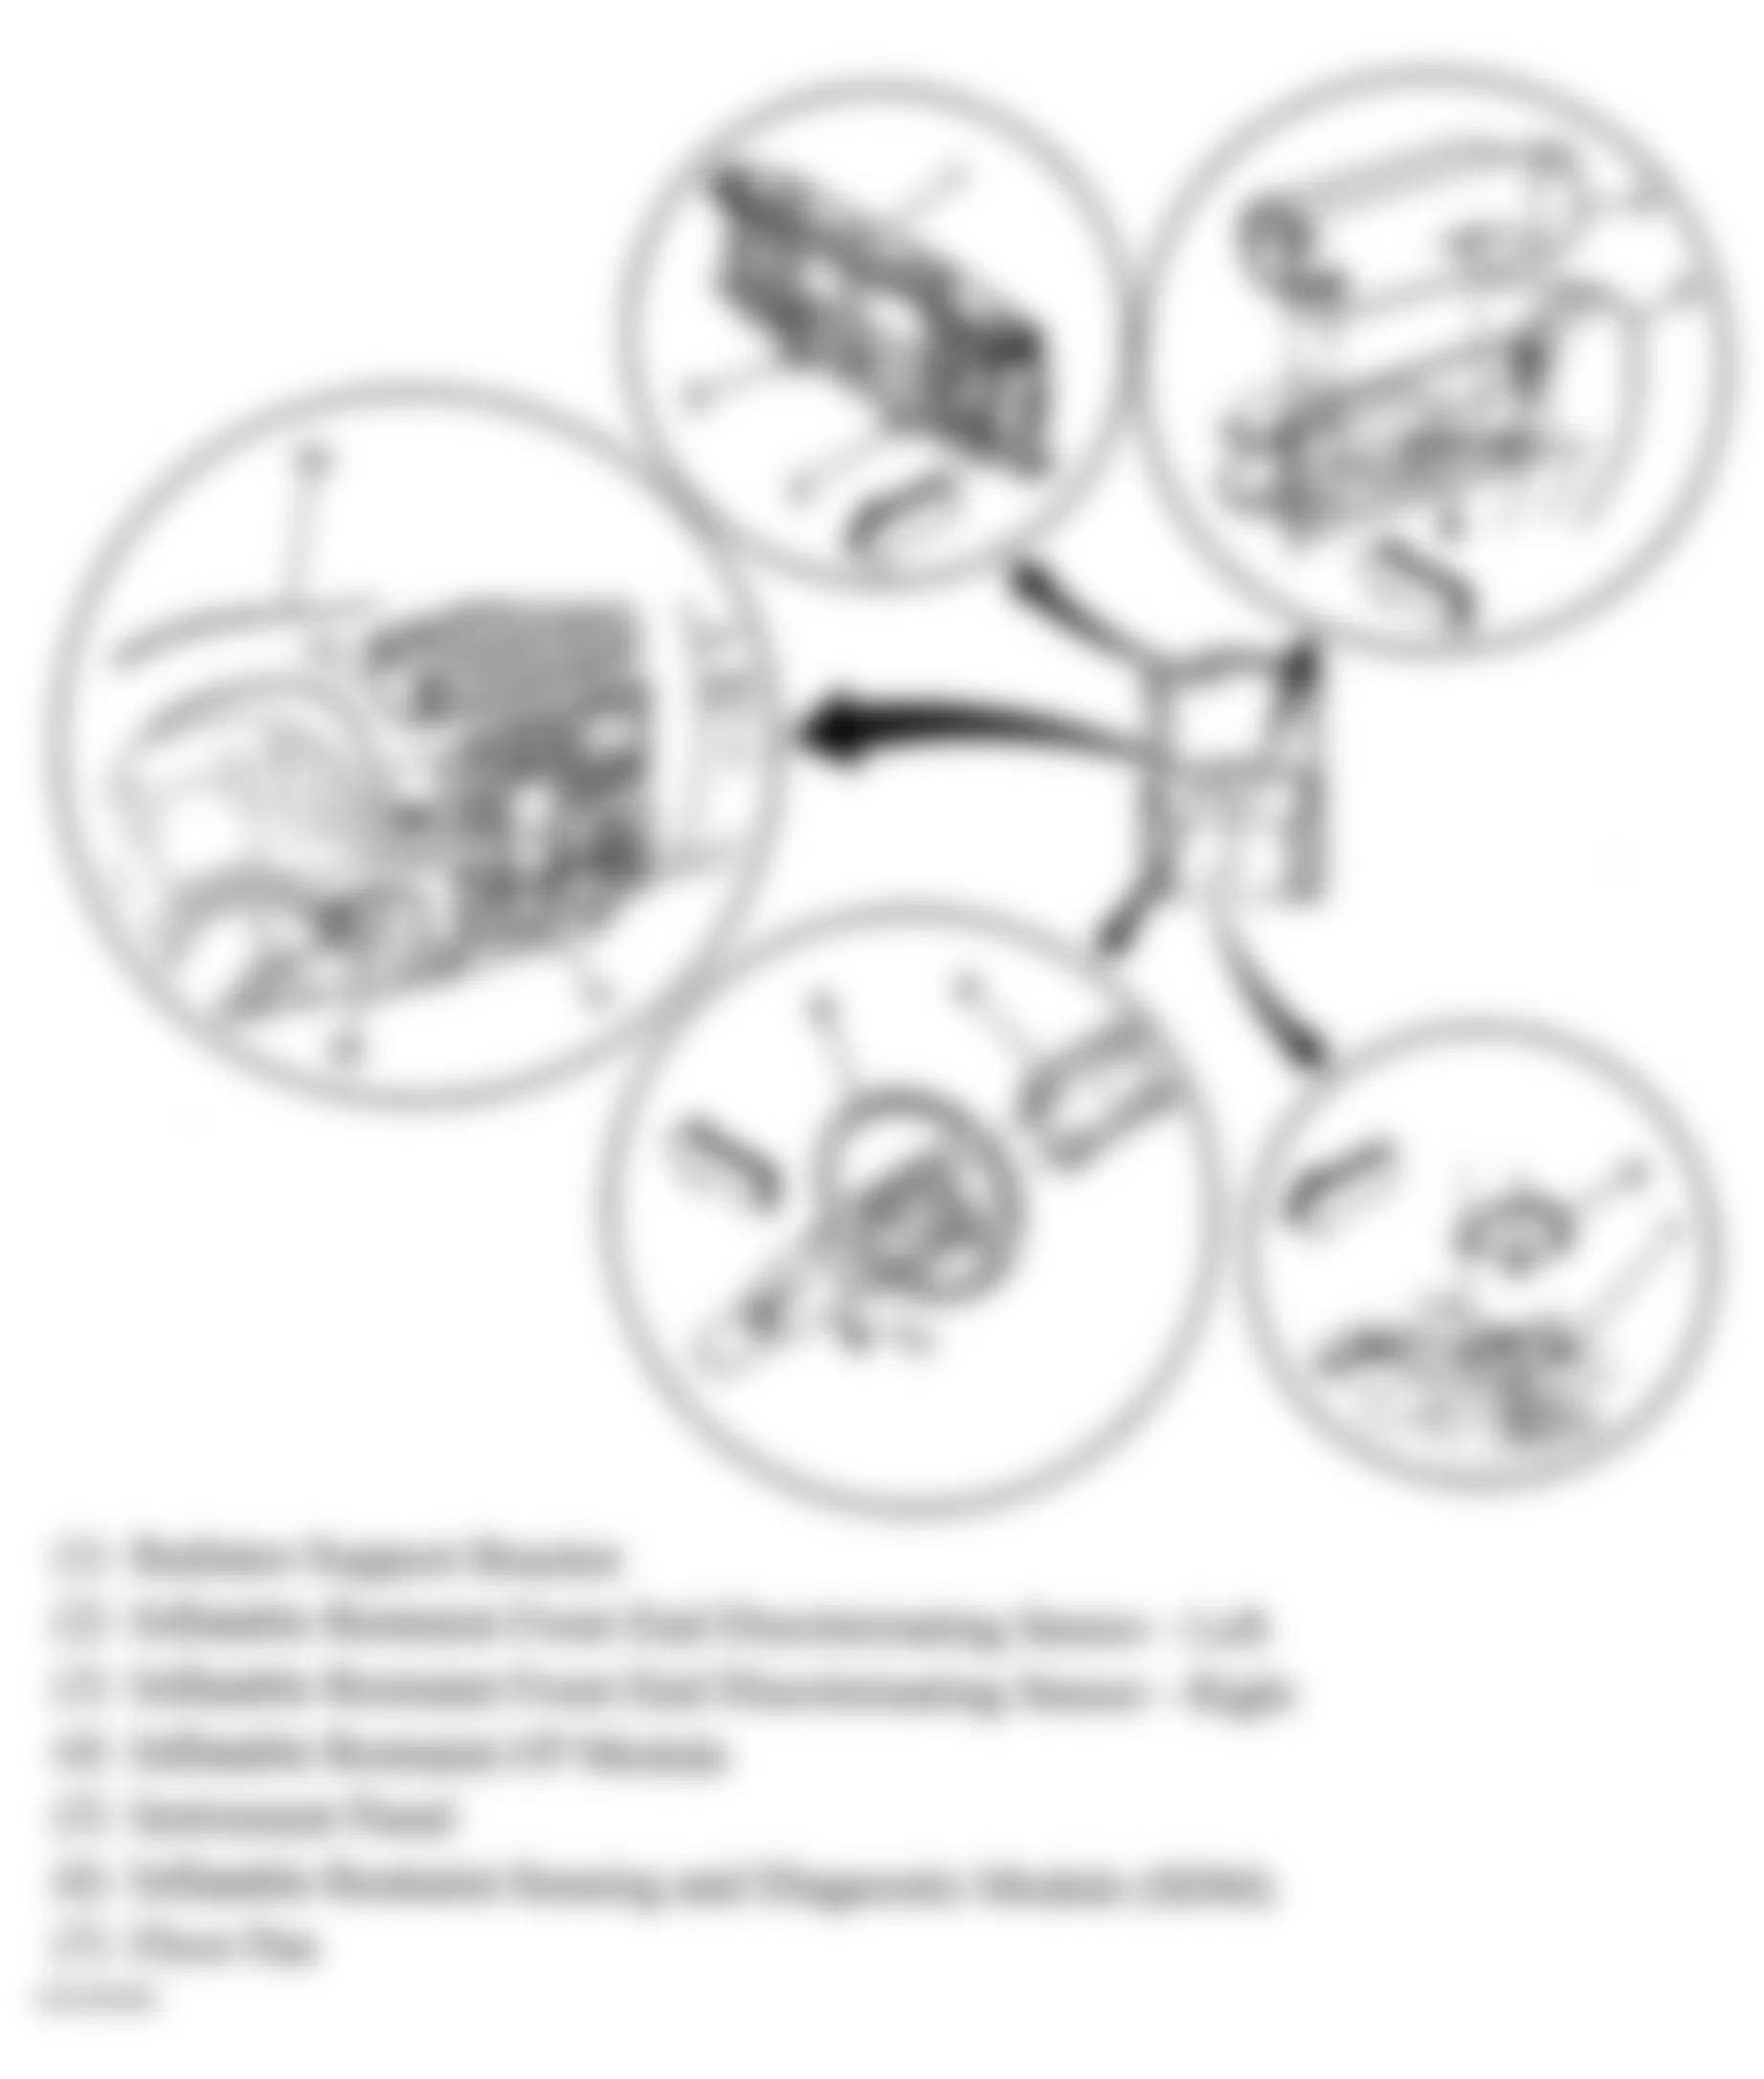 GMC Sonoma 2004 - Component Locations -  SIR Components (1 Of 2)